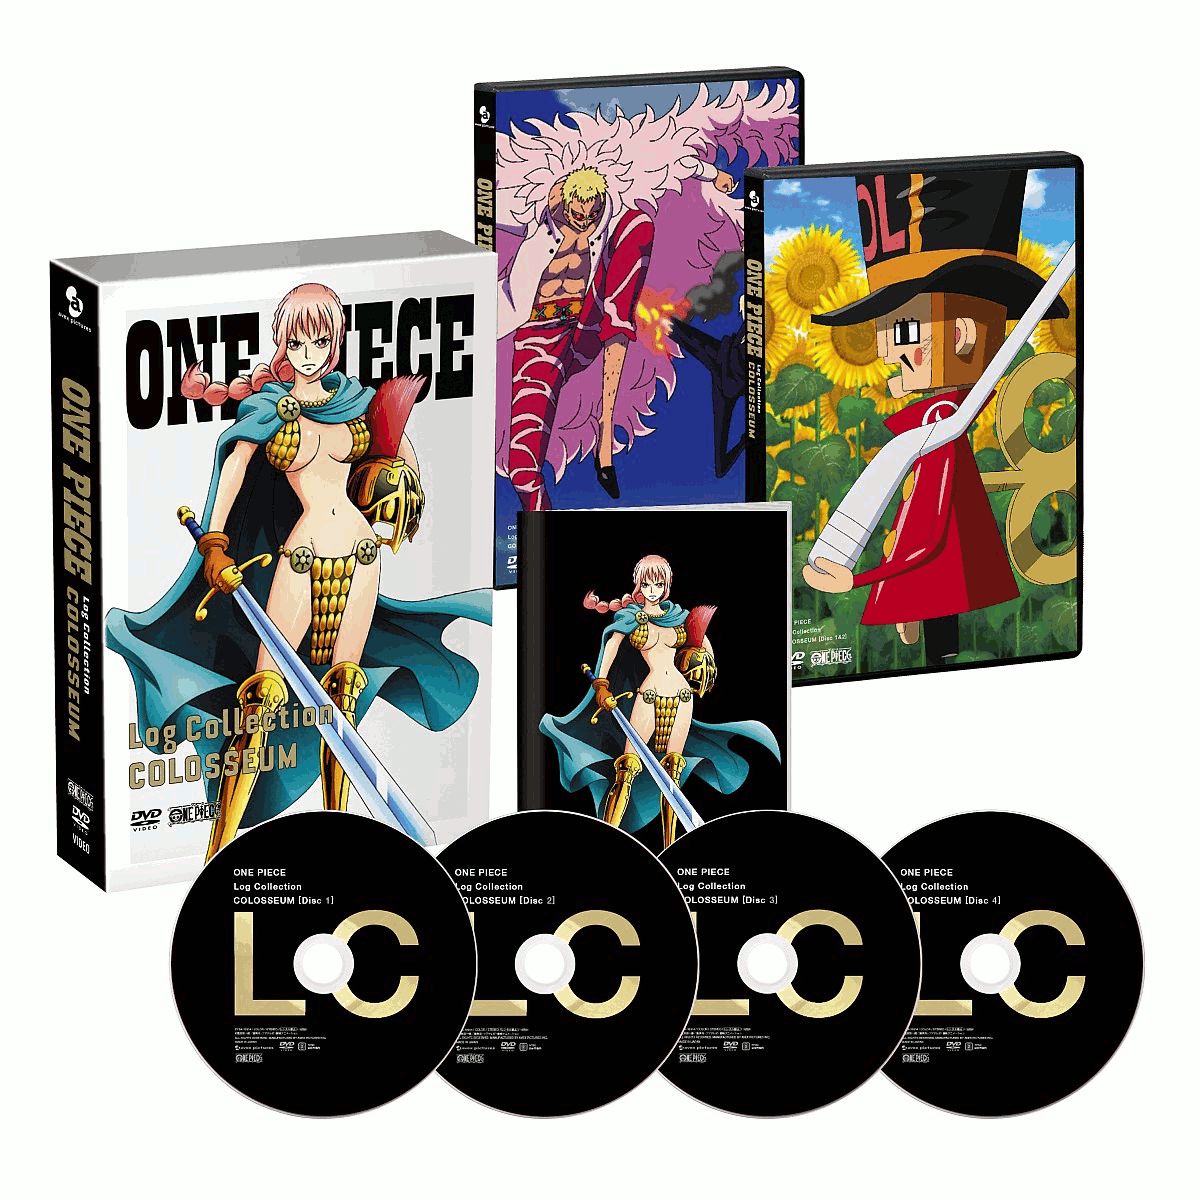 ONE PIECE Log Collection “COLOSSEUM”画像